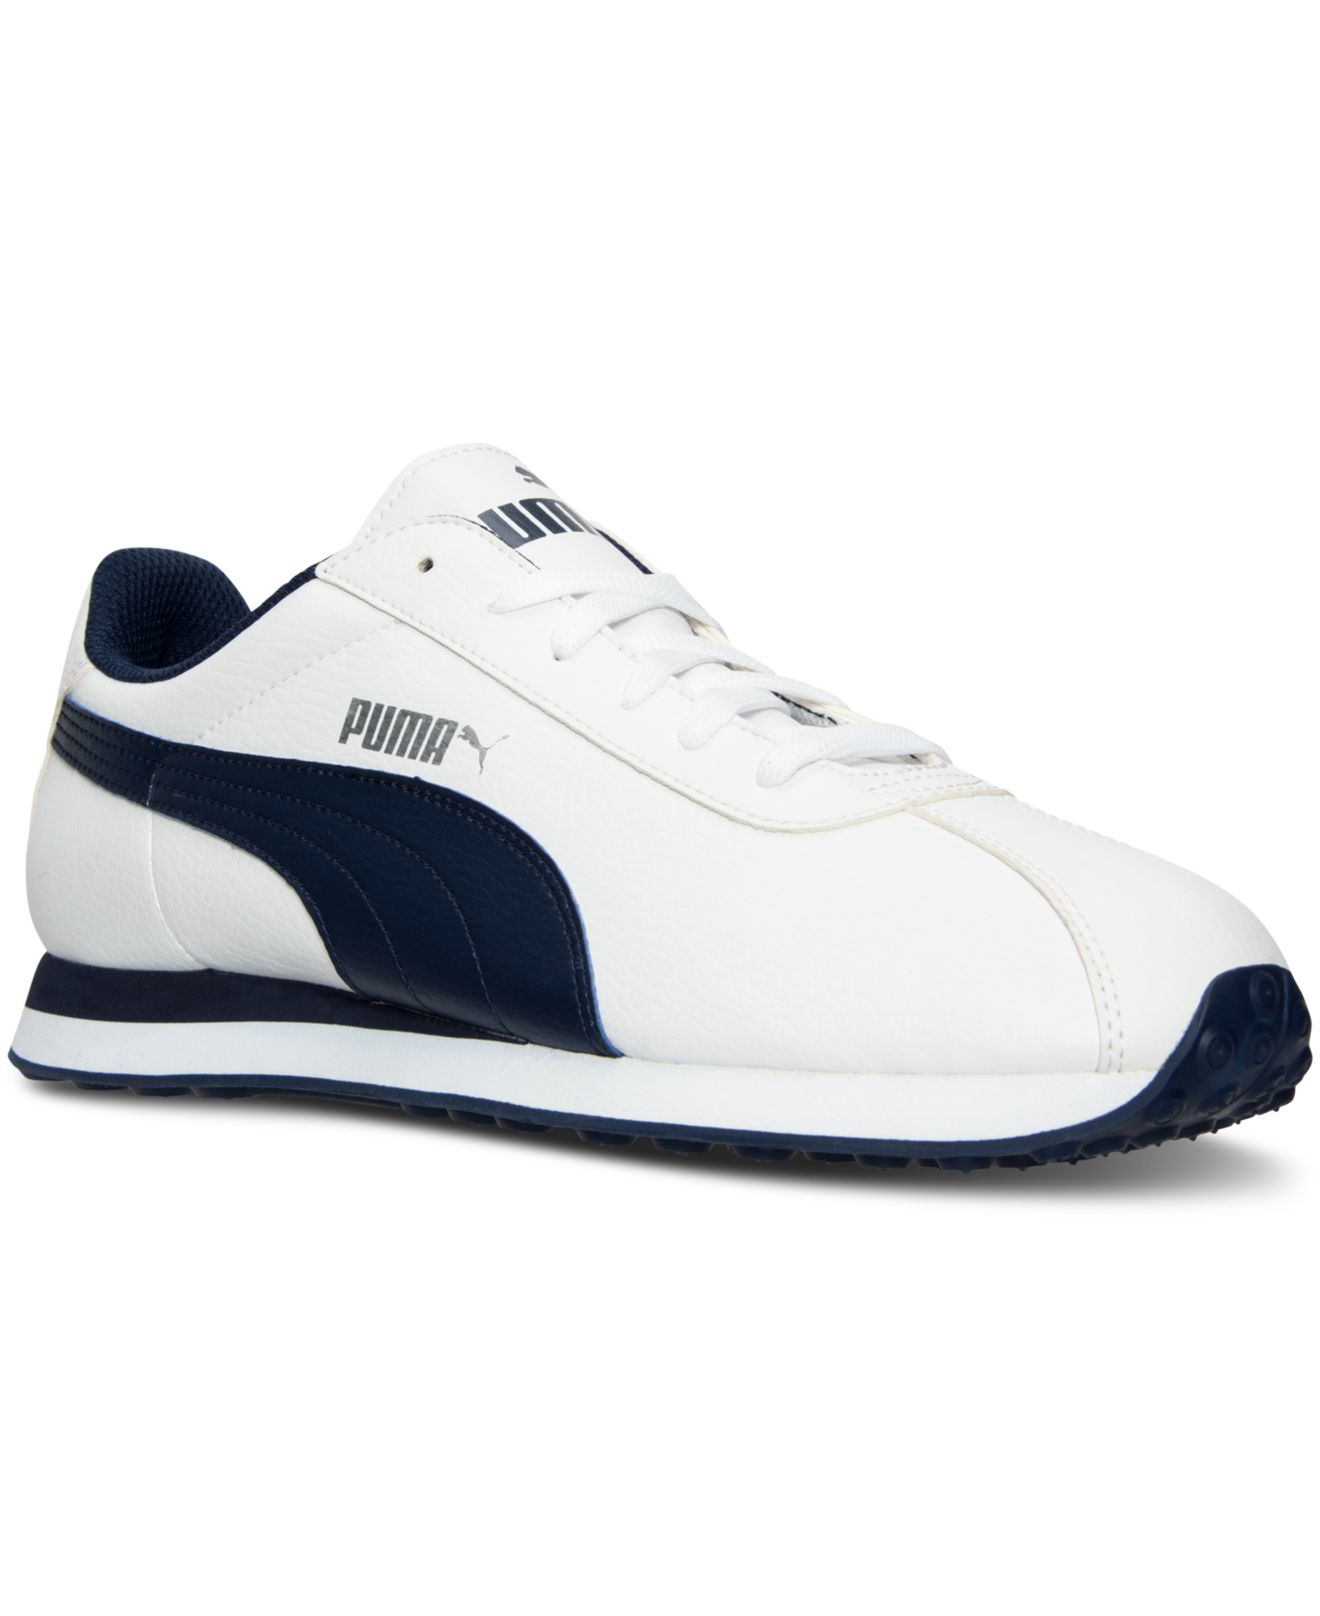 Lyst - Puma Men's Turin Casual Sneakers From Finish Line in White for Men